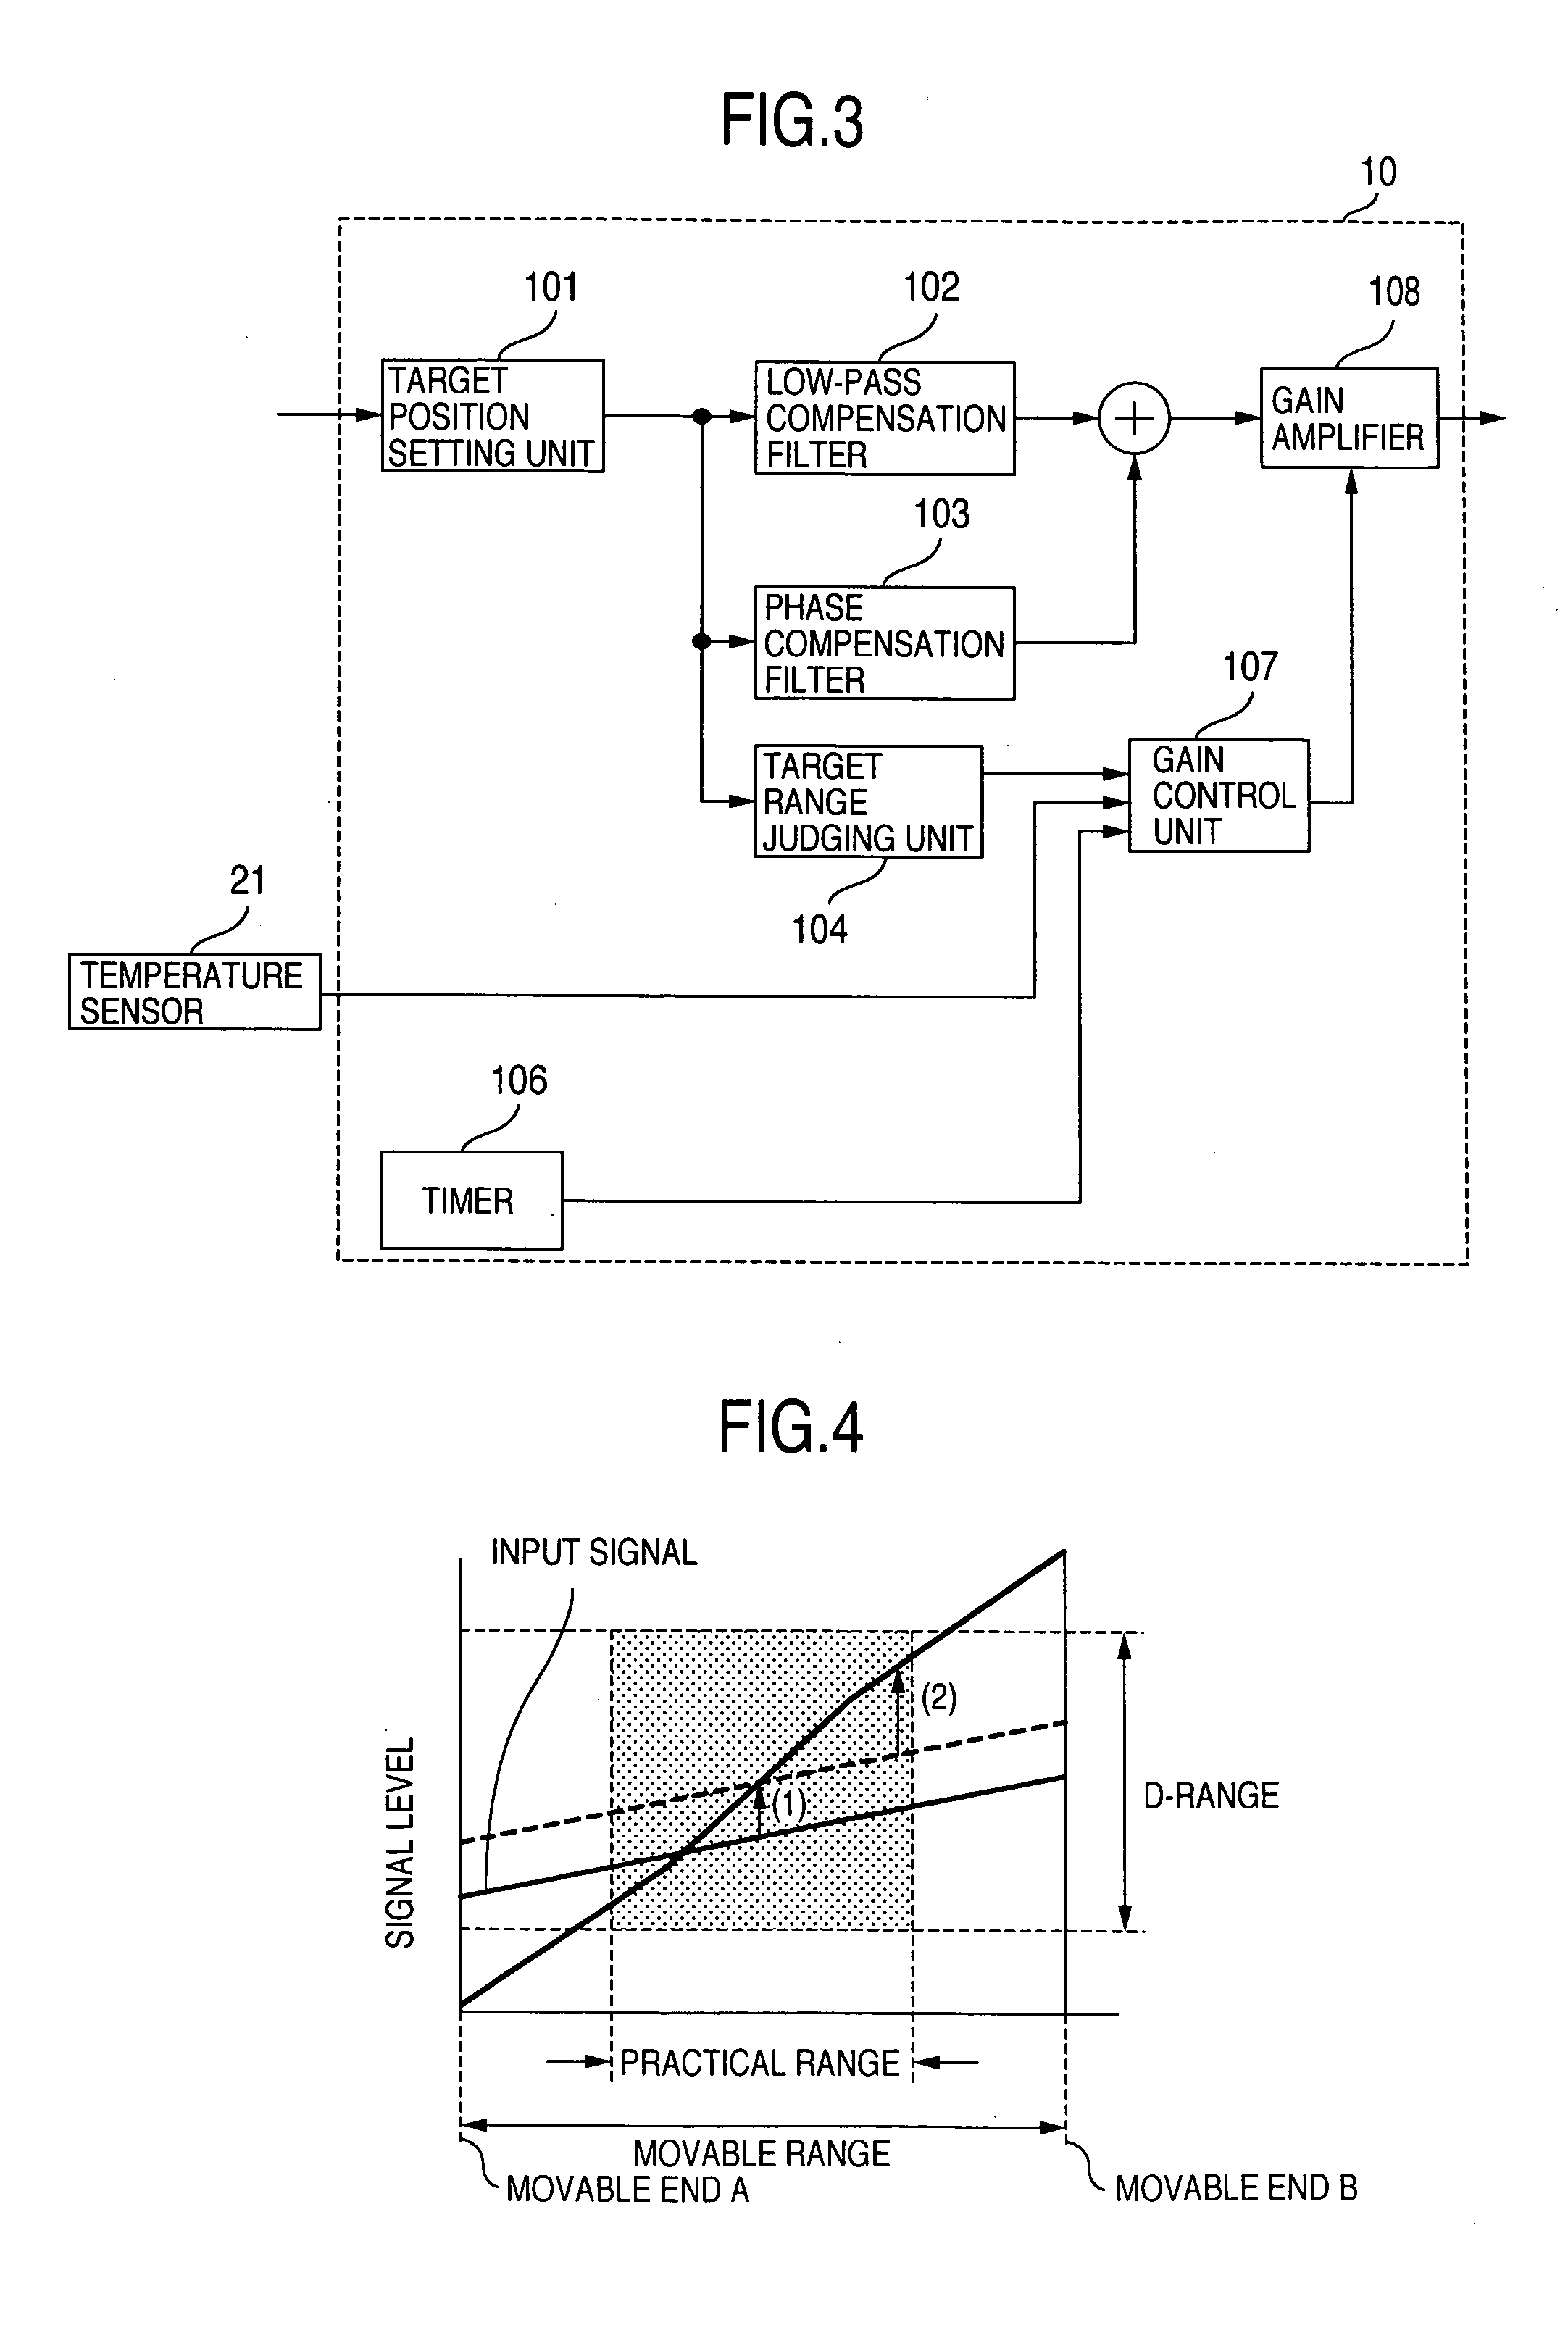 Optical disk device